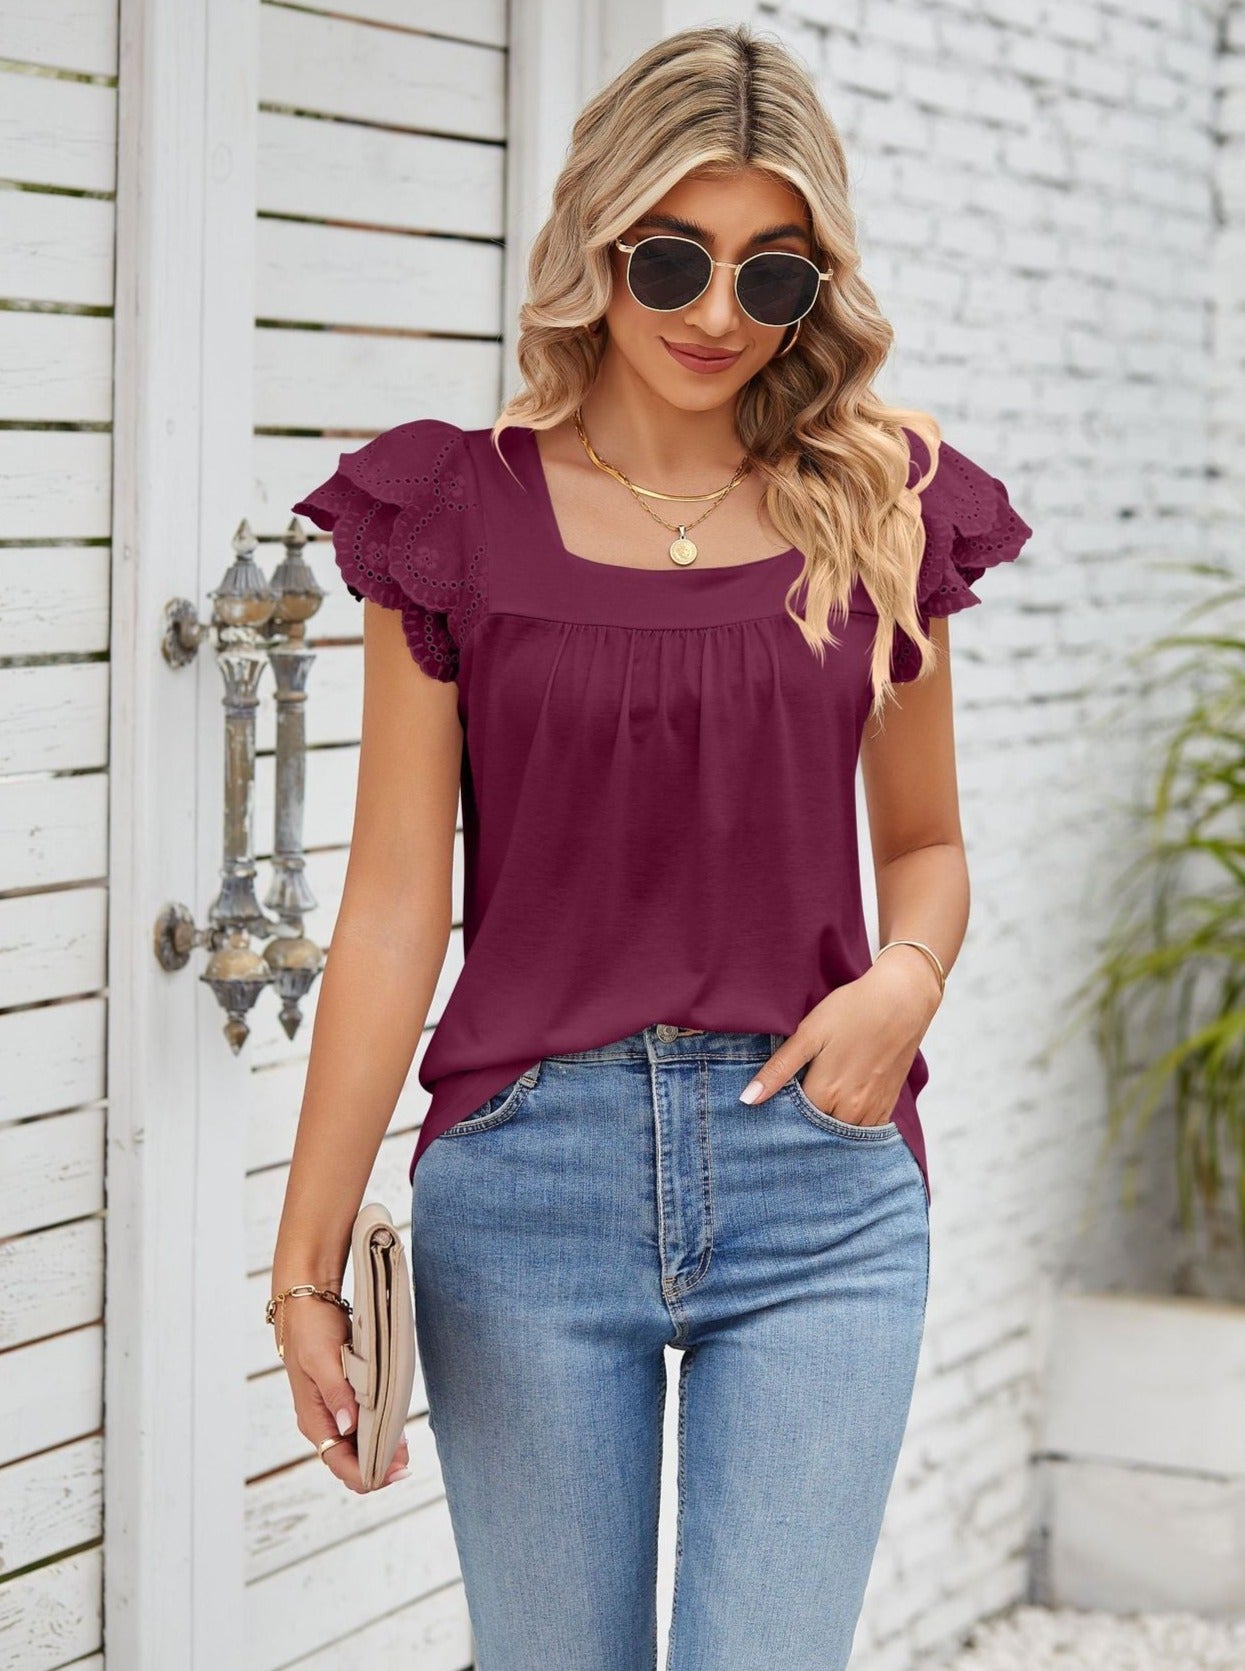 Wine Lace Stitching Square Collar Petal Short-Sleeved Shirt